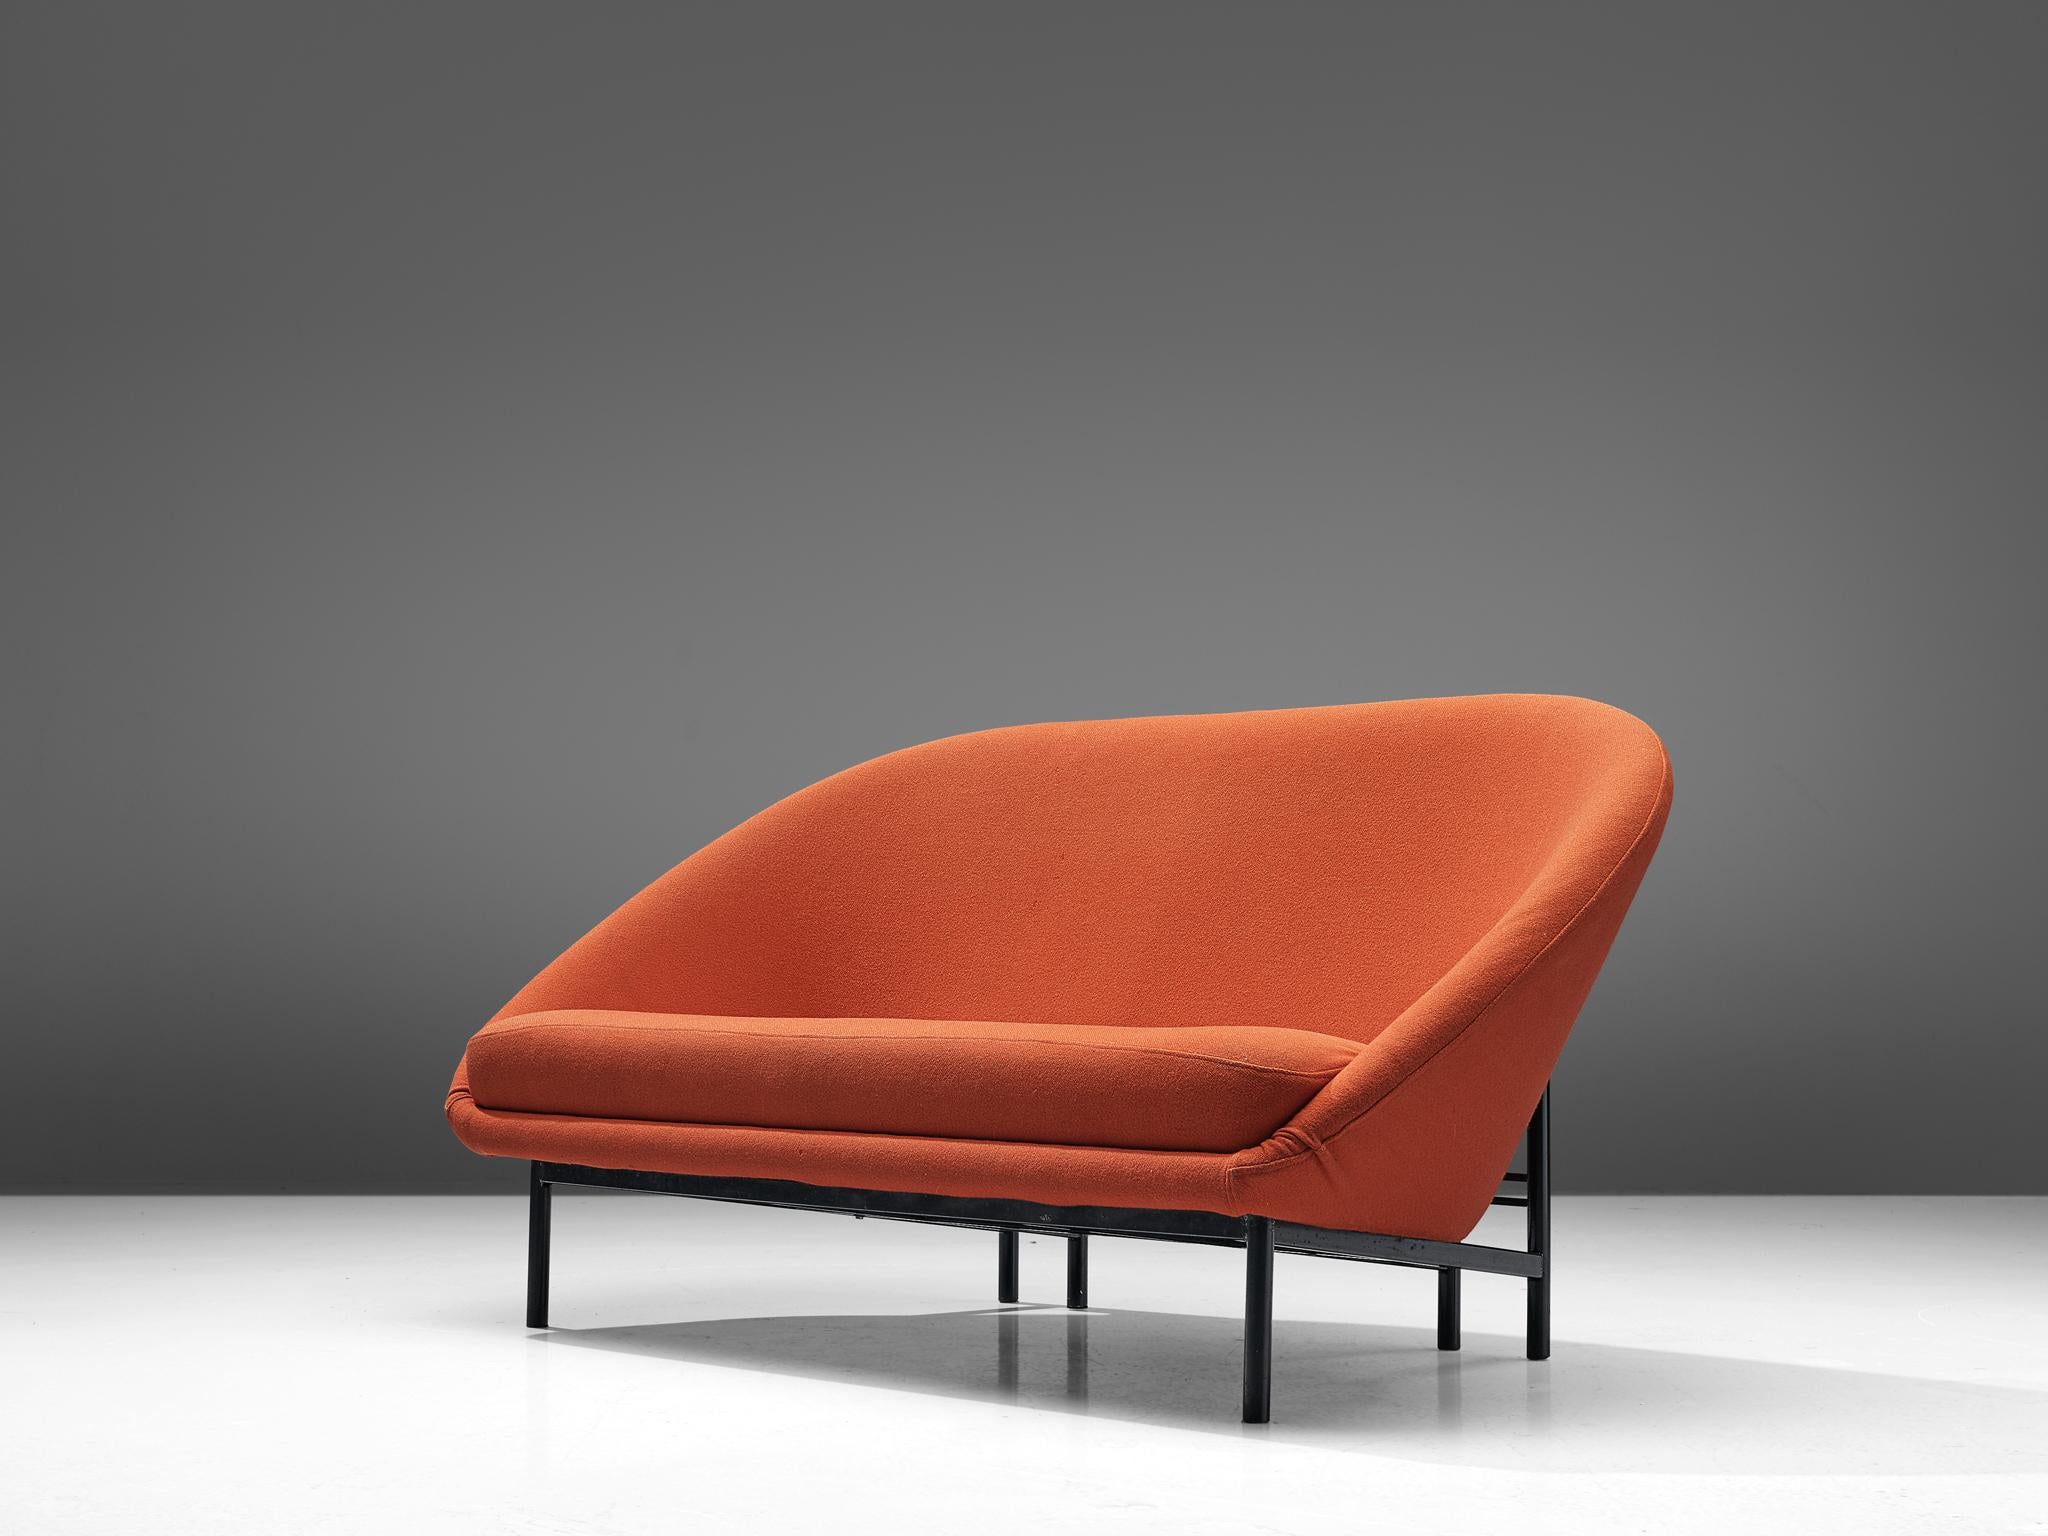 Theo Ruth for Artifort, sofa, fabric and metal, The Netherlands, 1970.

A Dutch settee in orange colored fabric by Theo Ruth. The back tilts slightly backward and has the recognizable natural flow and feel of Ruth's design. The frame of the sofa is